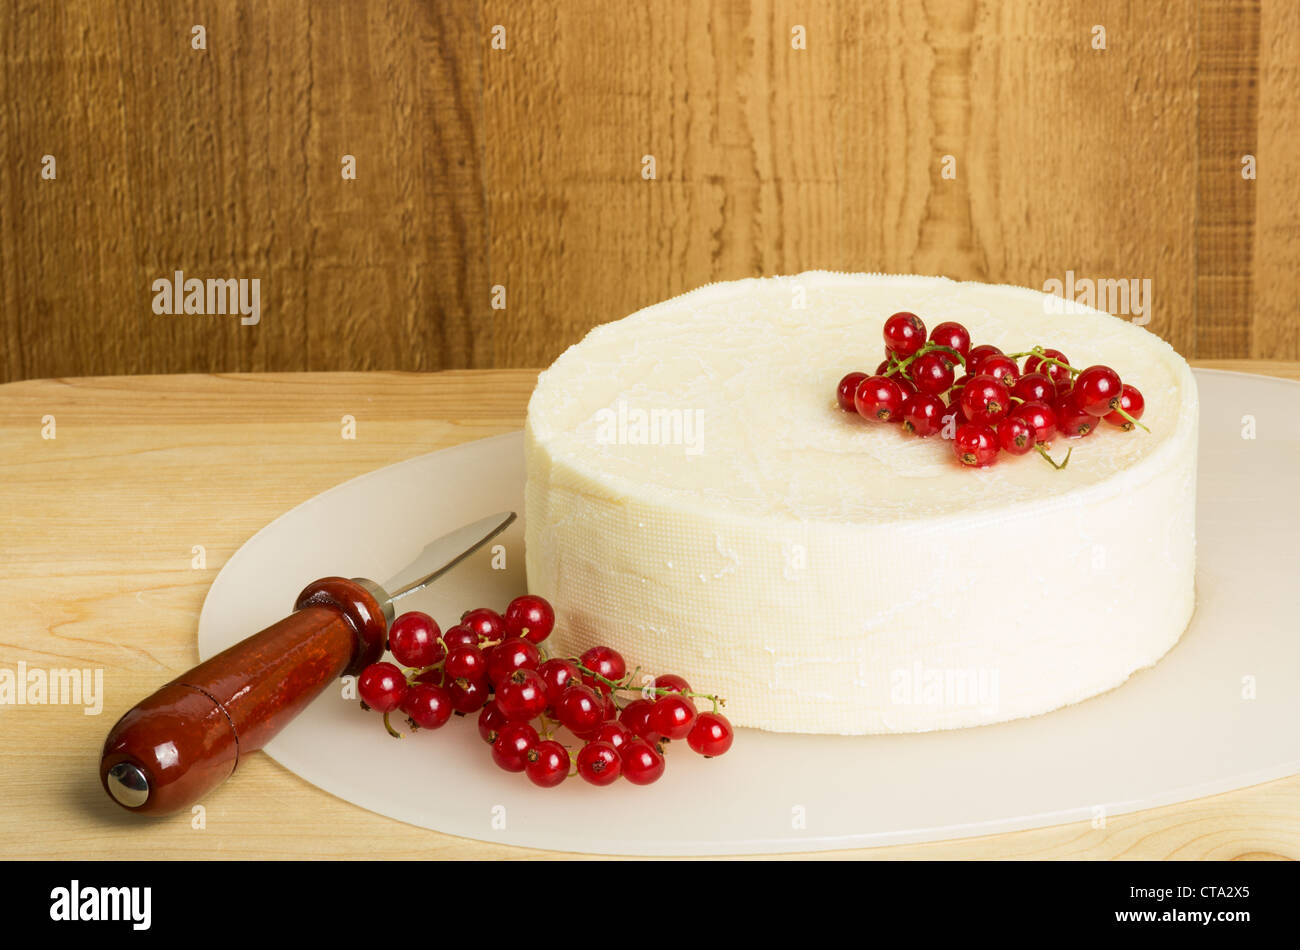 White cheddar cheese garnished with currants Stock Photo